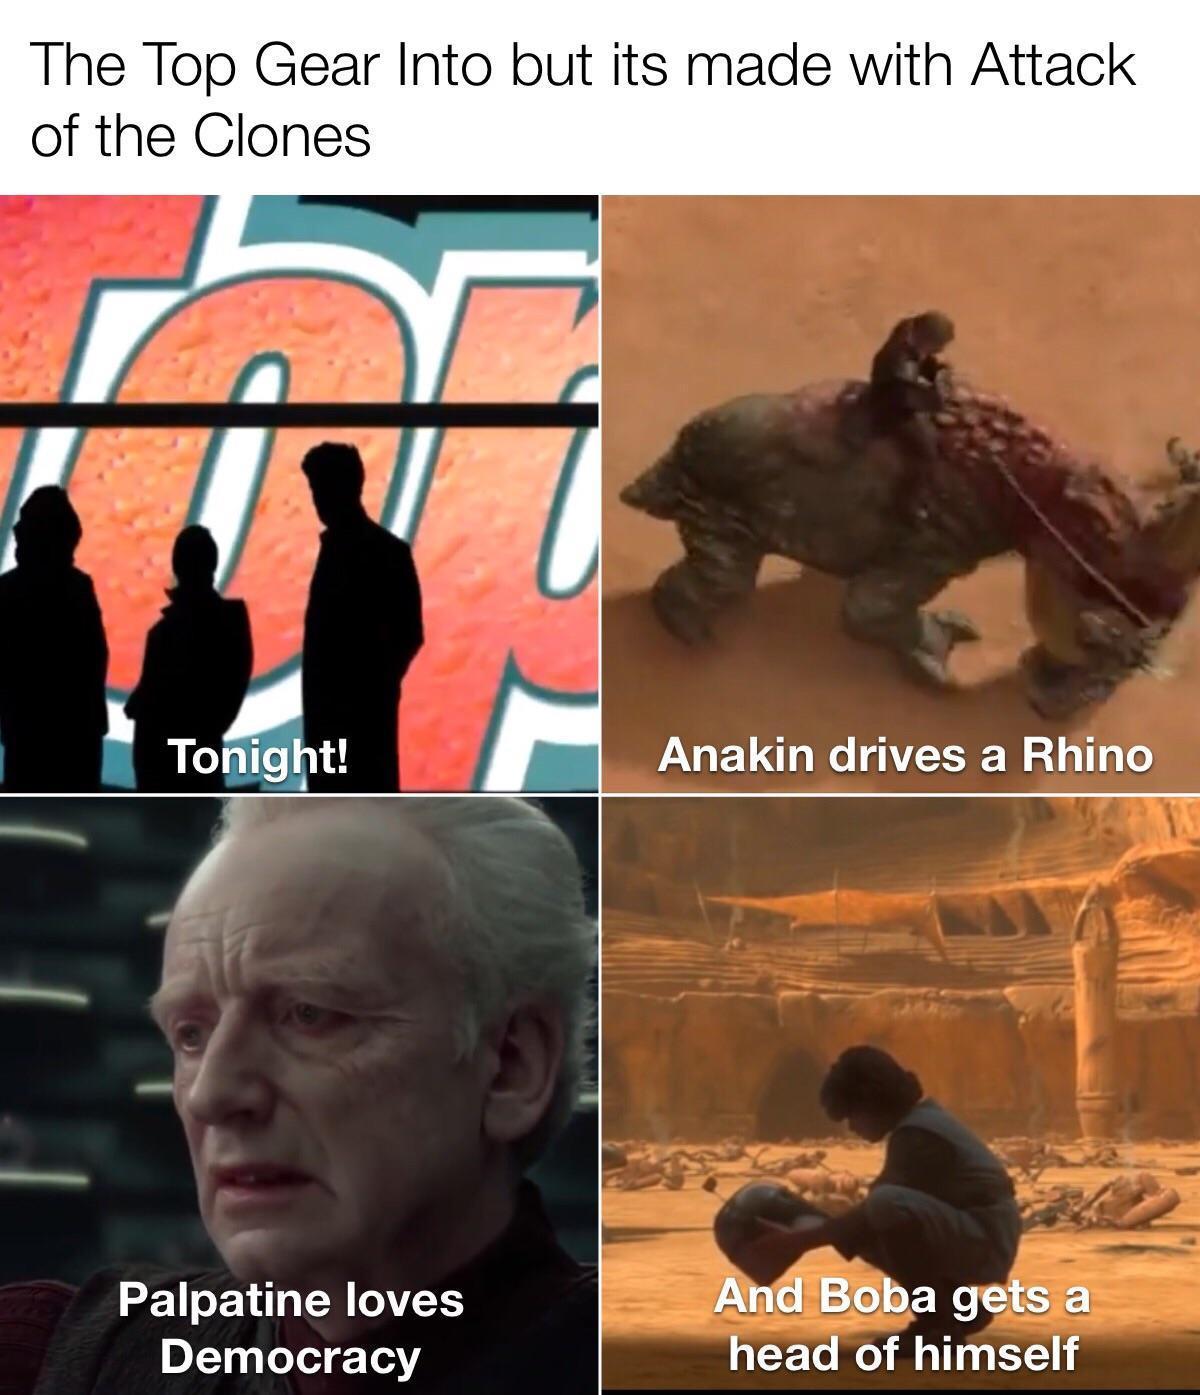 dank memes - star wars top gear meme - The Top Gear Into but its made with Attack of the Clones I Tonight! Anakin drives a Rhino Palpatine loves Democracy And Boba gets a head of himself